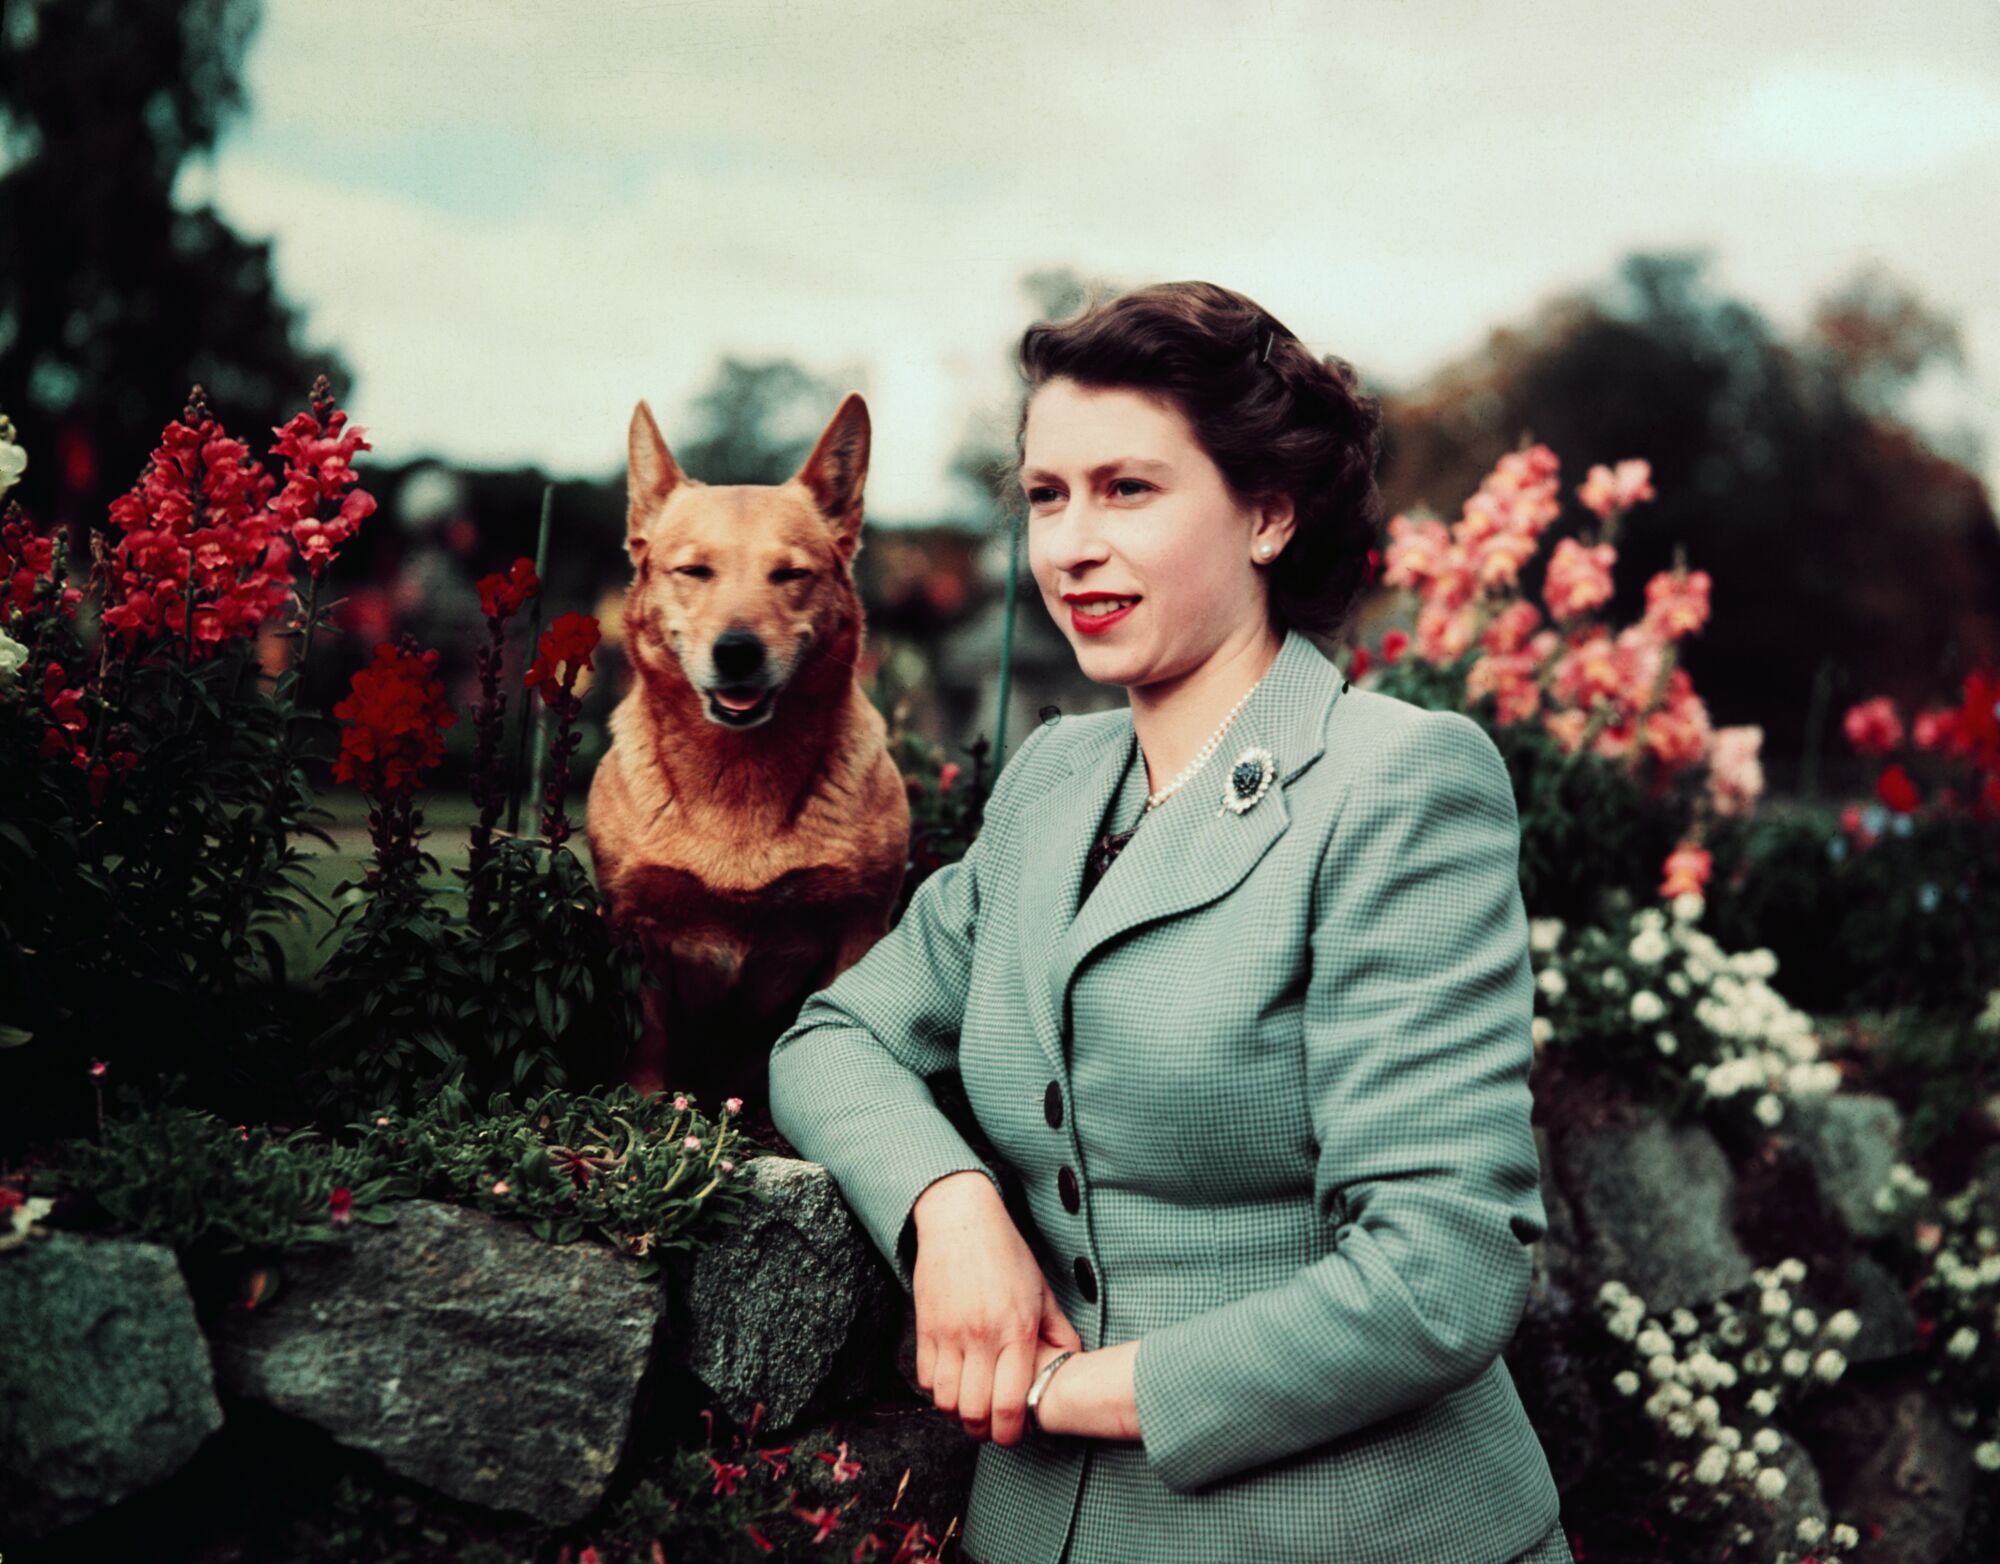 Queen Elizabeth II poses with one of her beloved corgis next to flowers in September 1952.